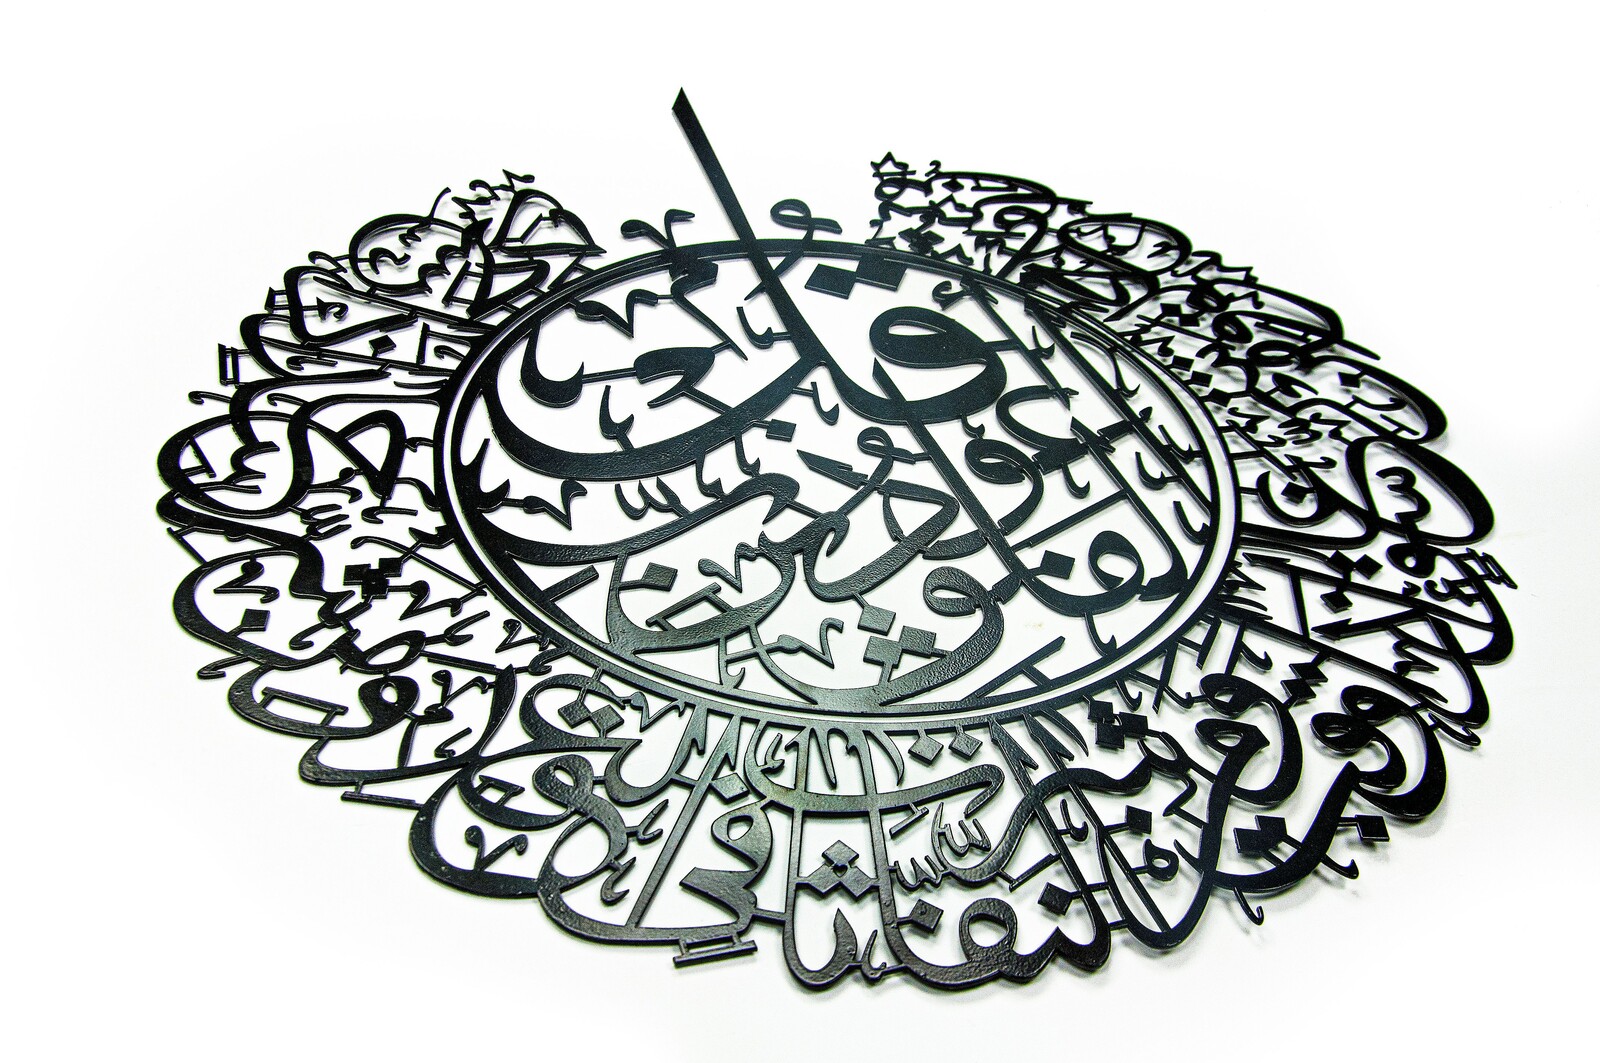 Vav Inscribed and Embellished Religious Metal Wall Art - Black